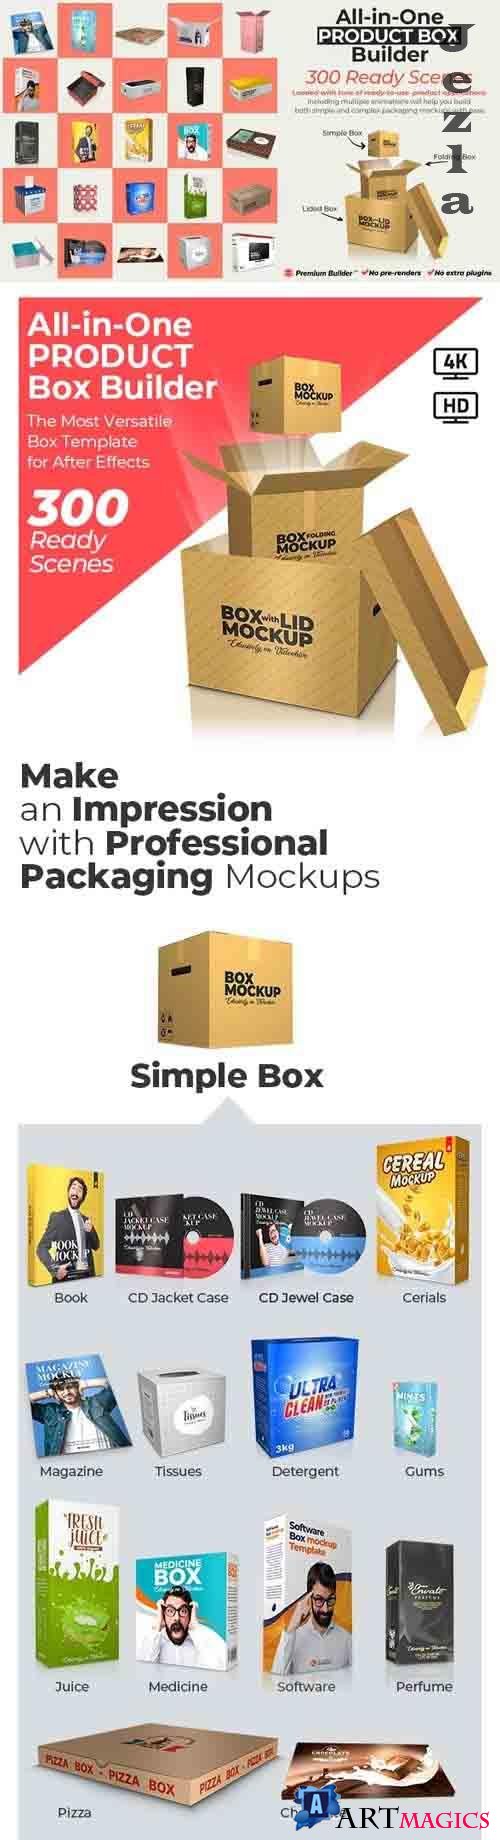 Videohive - All-in-One Product Box Builder - 25901445